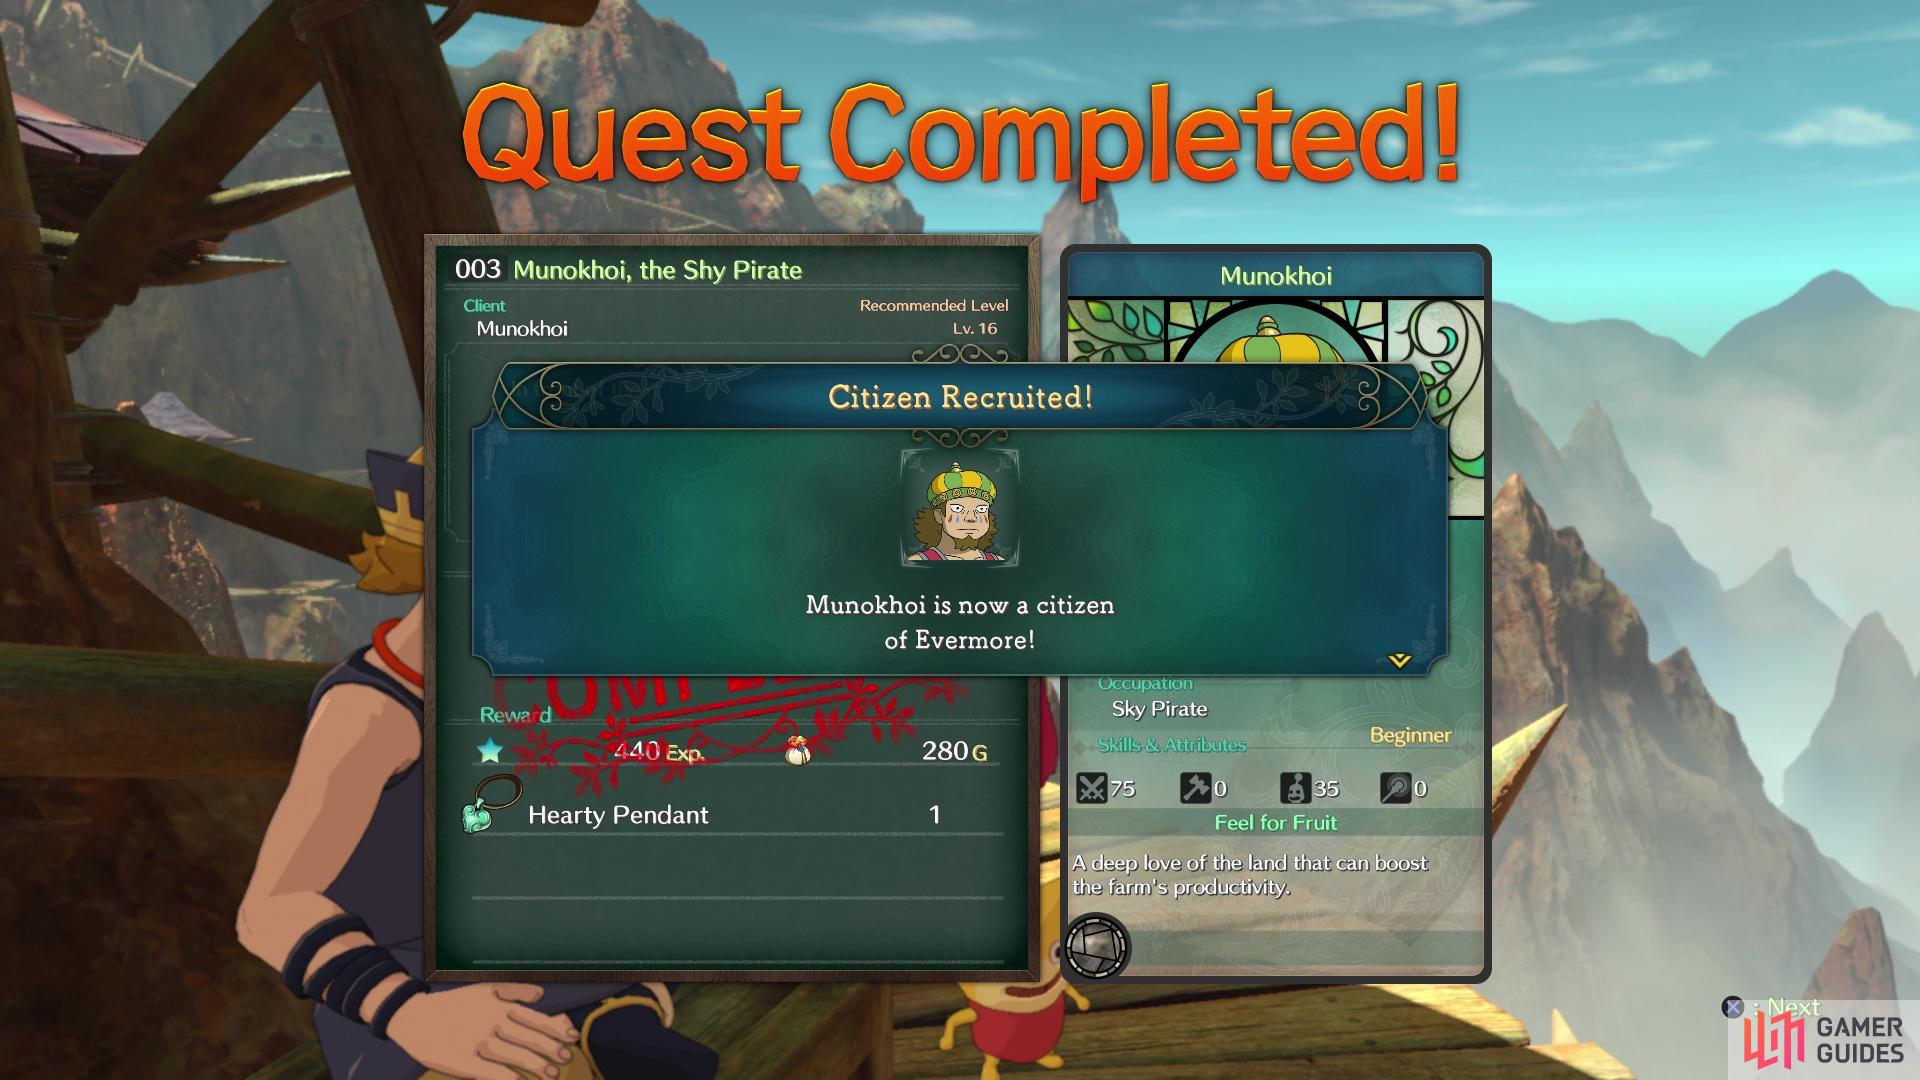 You can begin recruiting new Citizens by doing other sidequests, although there are only so many at this point